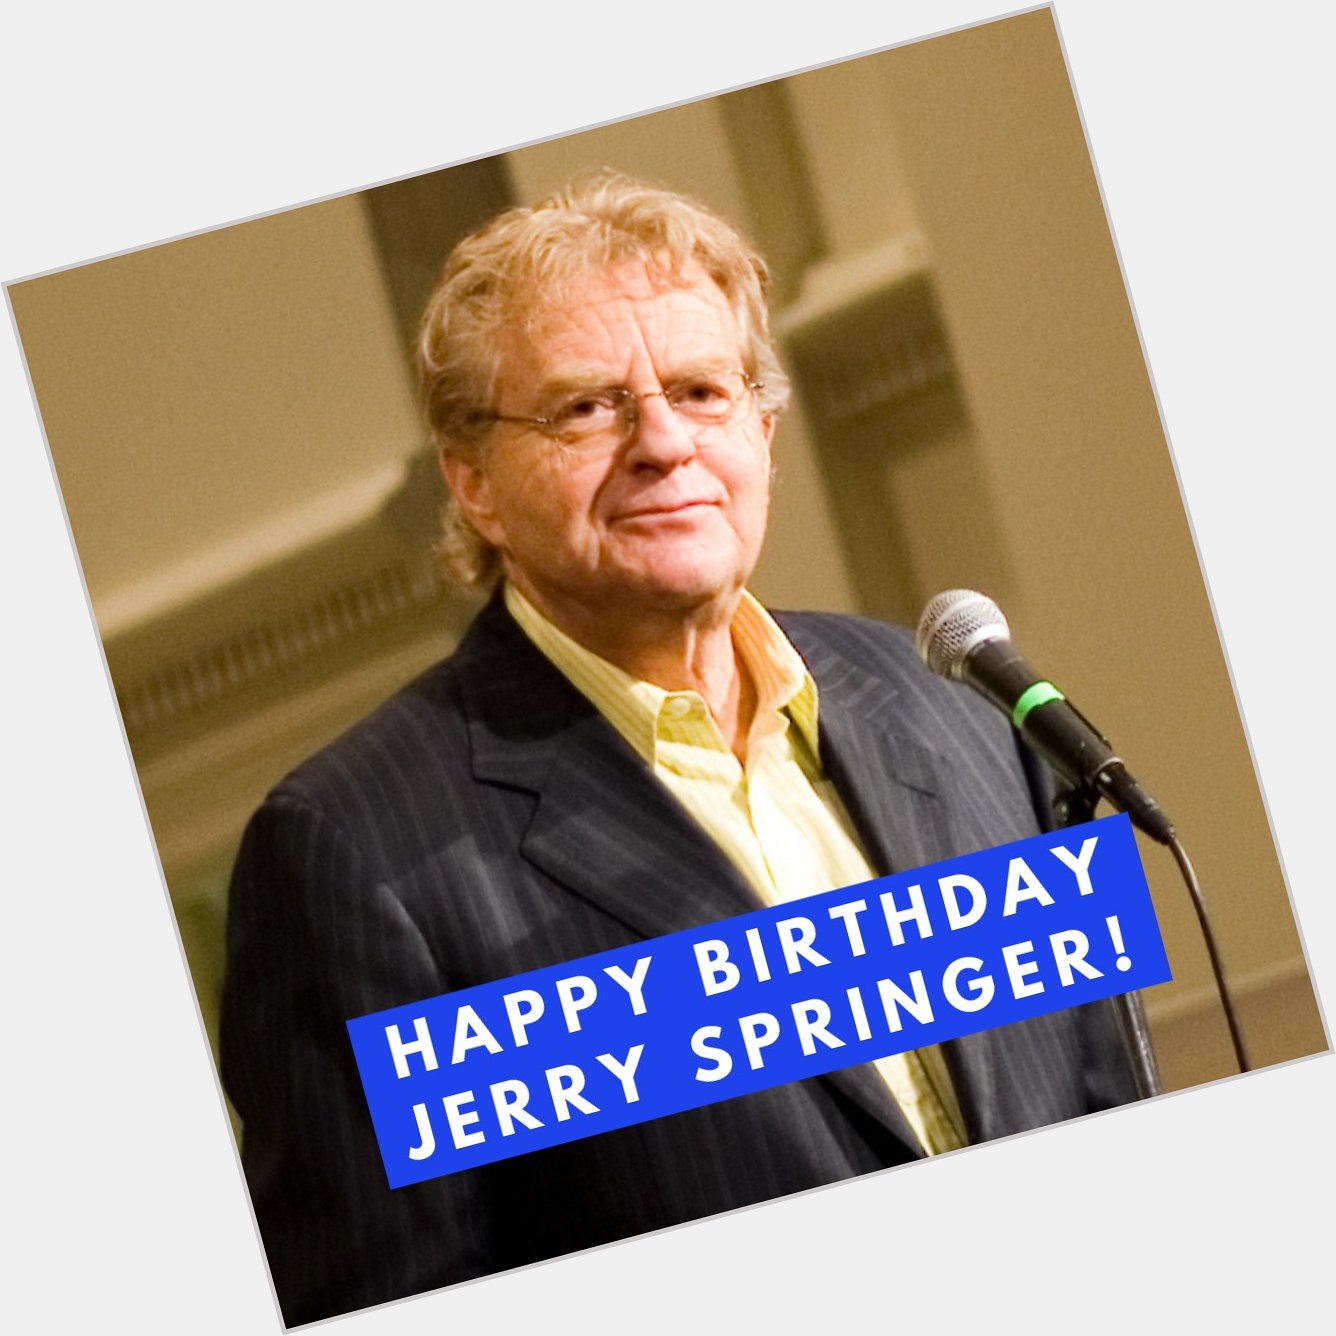 Join us in wishing Jerry Springer a happy birthday!   